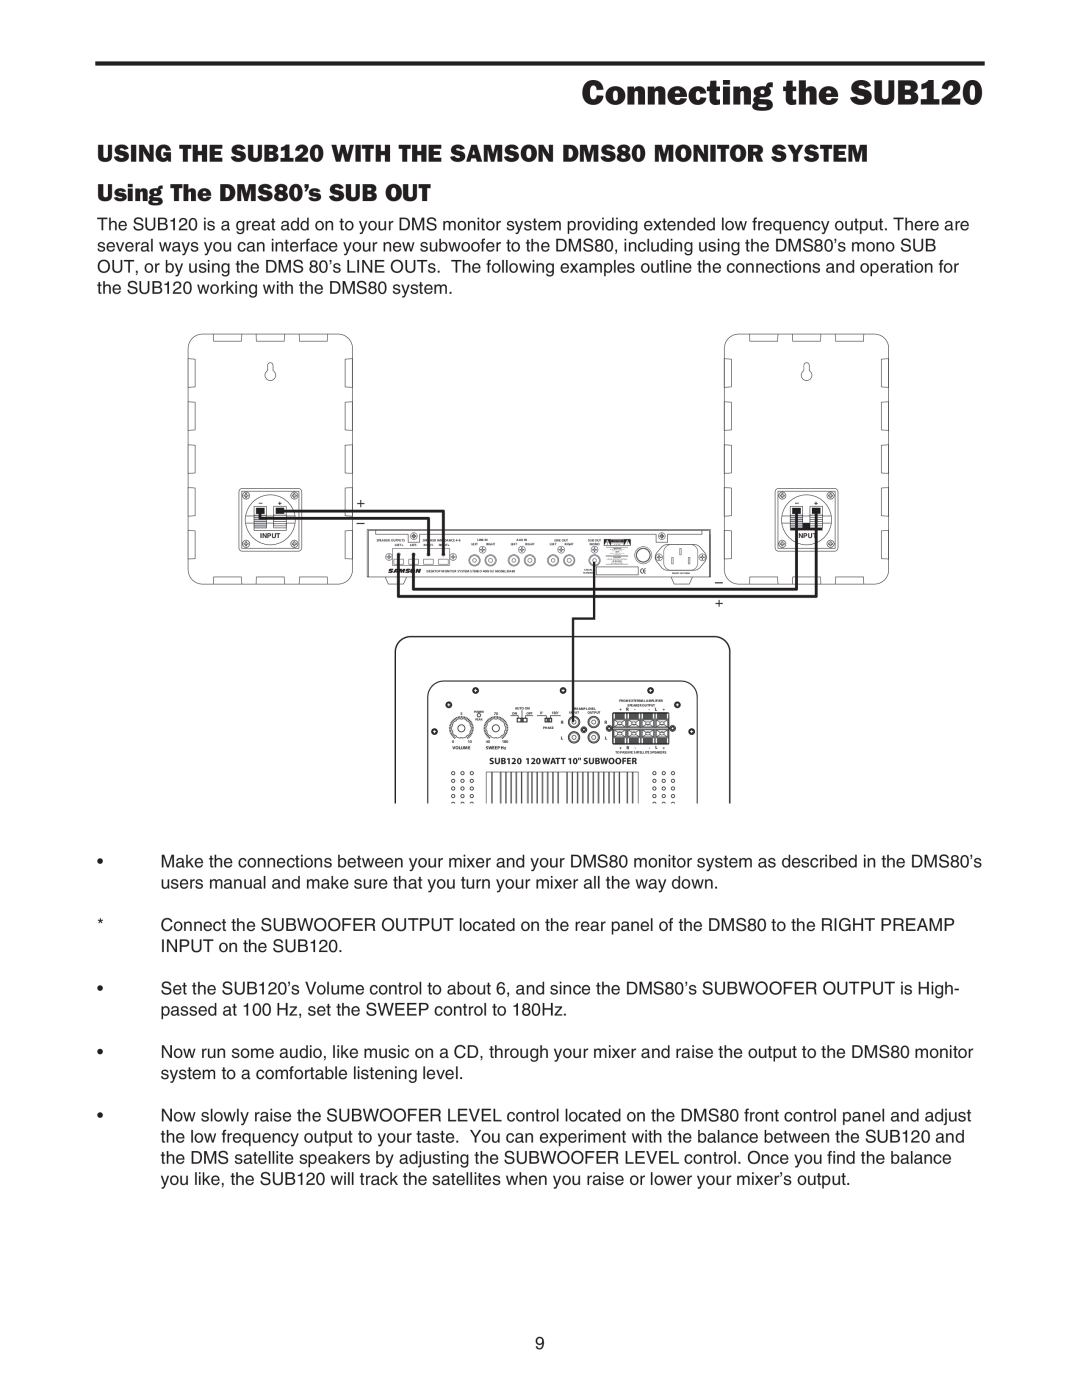 Samson Sub120 owner manual Connecting the SUB120, Using The DMS80’s SUB OUT 